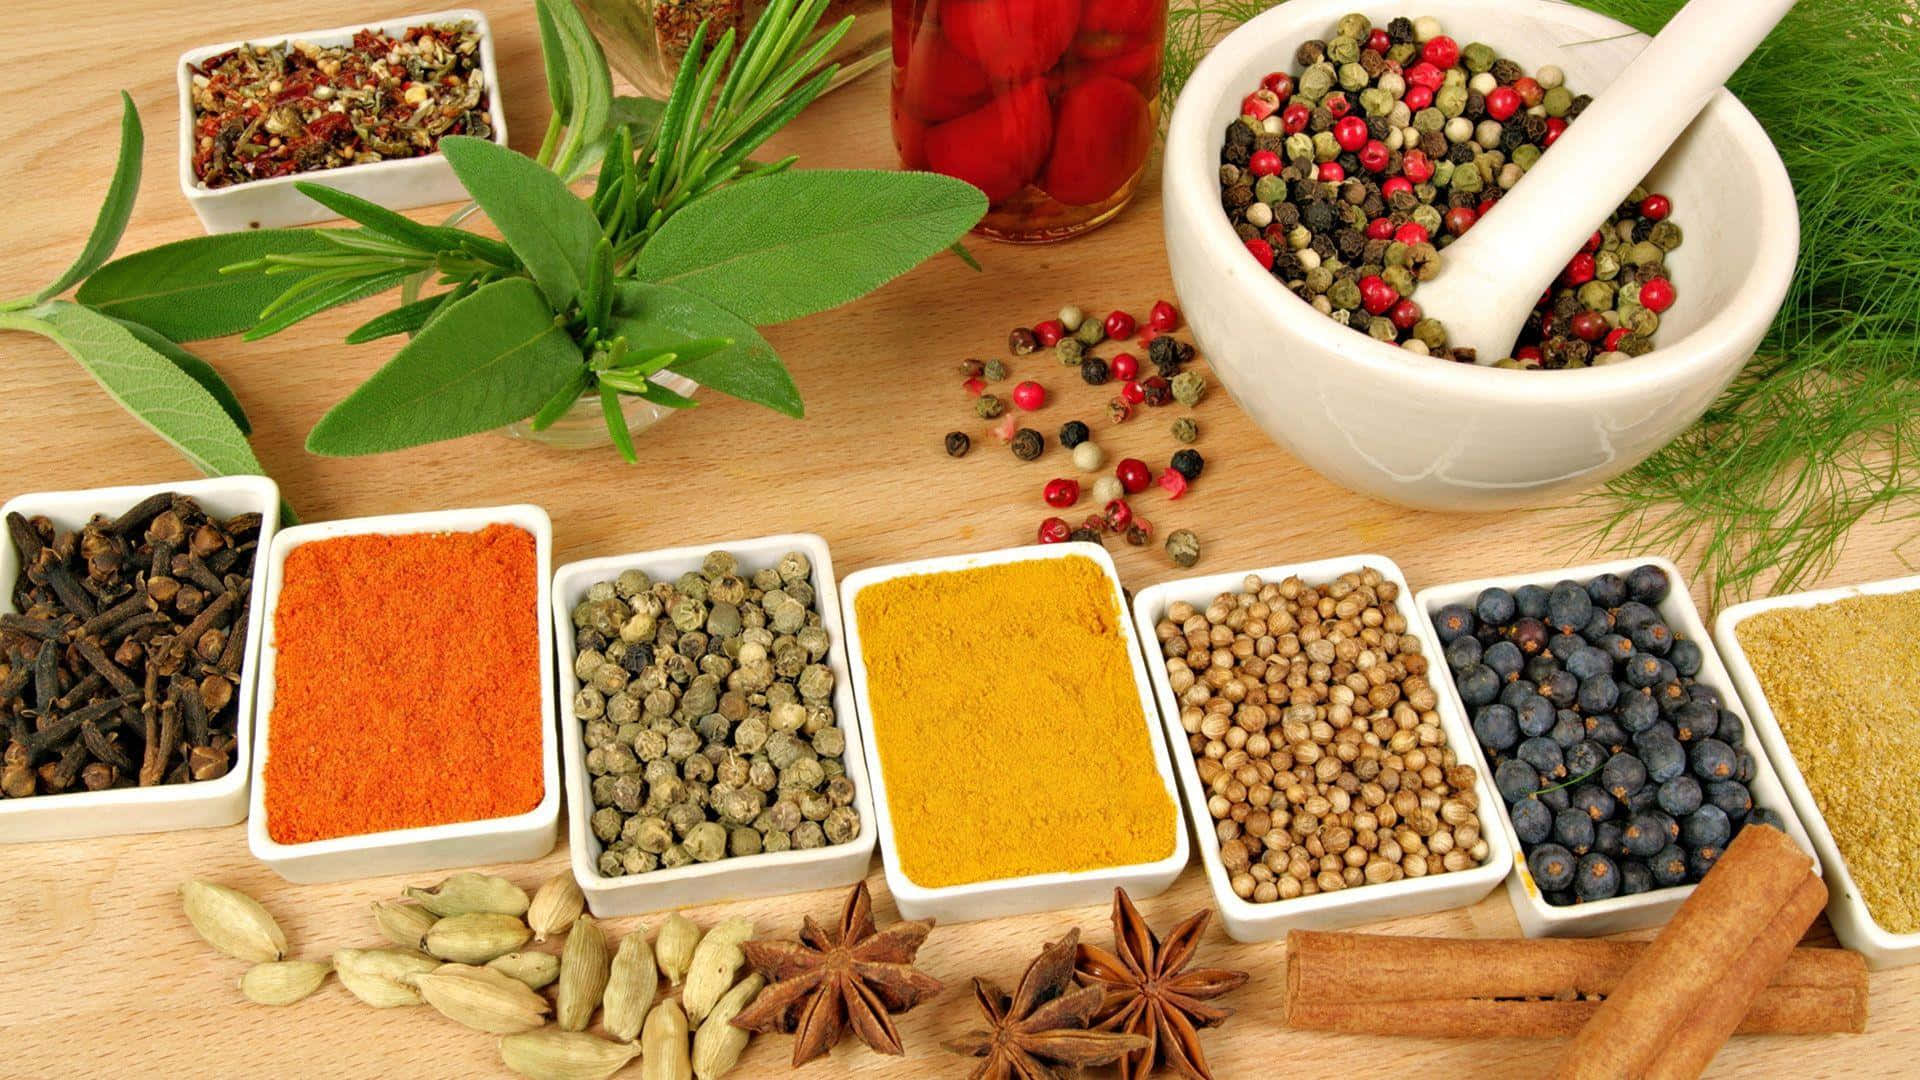 A collection of colorful spices adding flavor and flair to any dish!